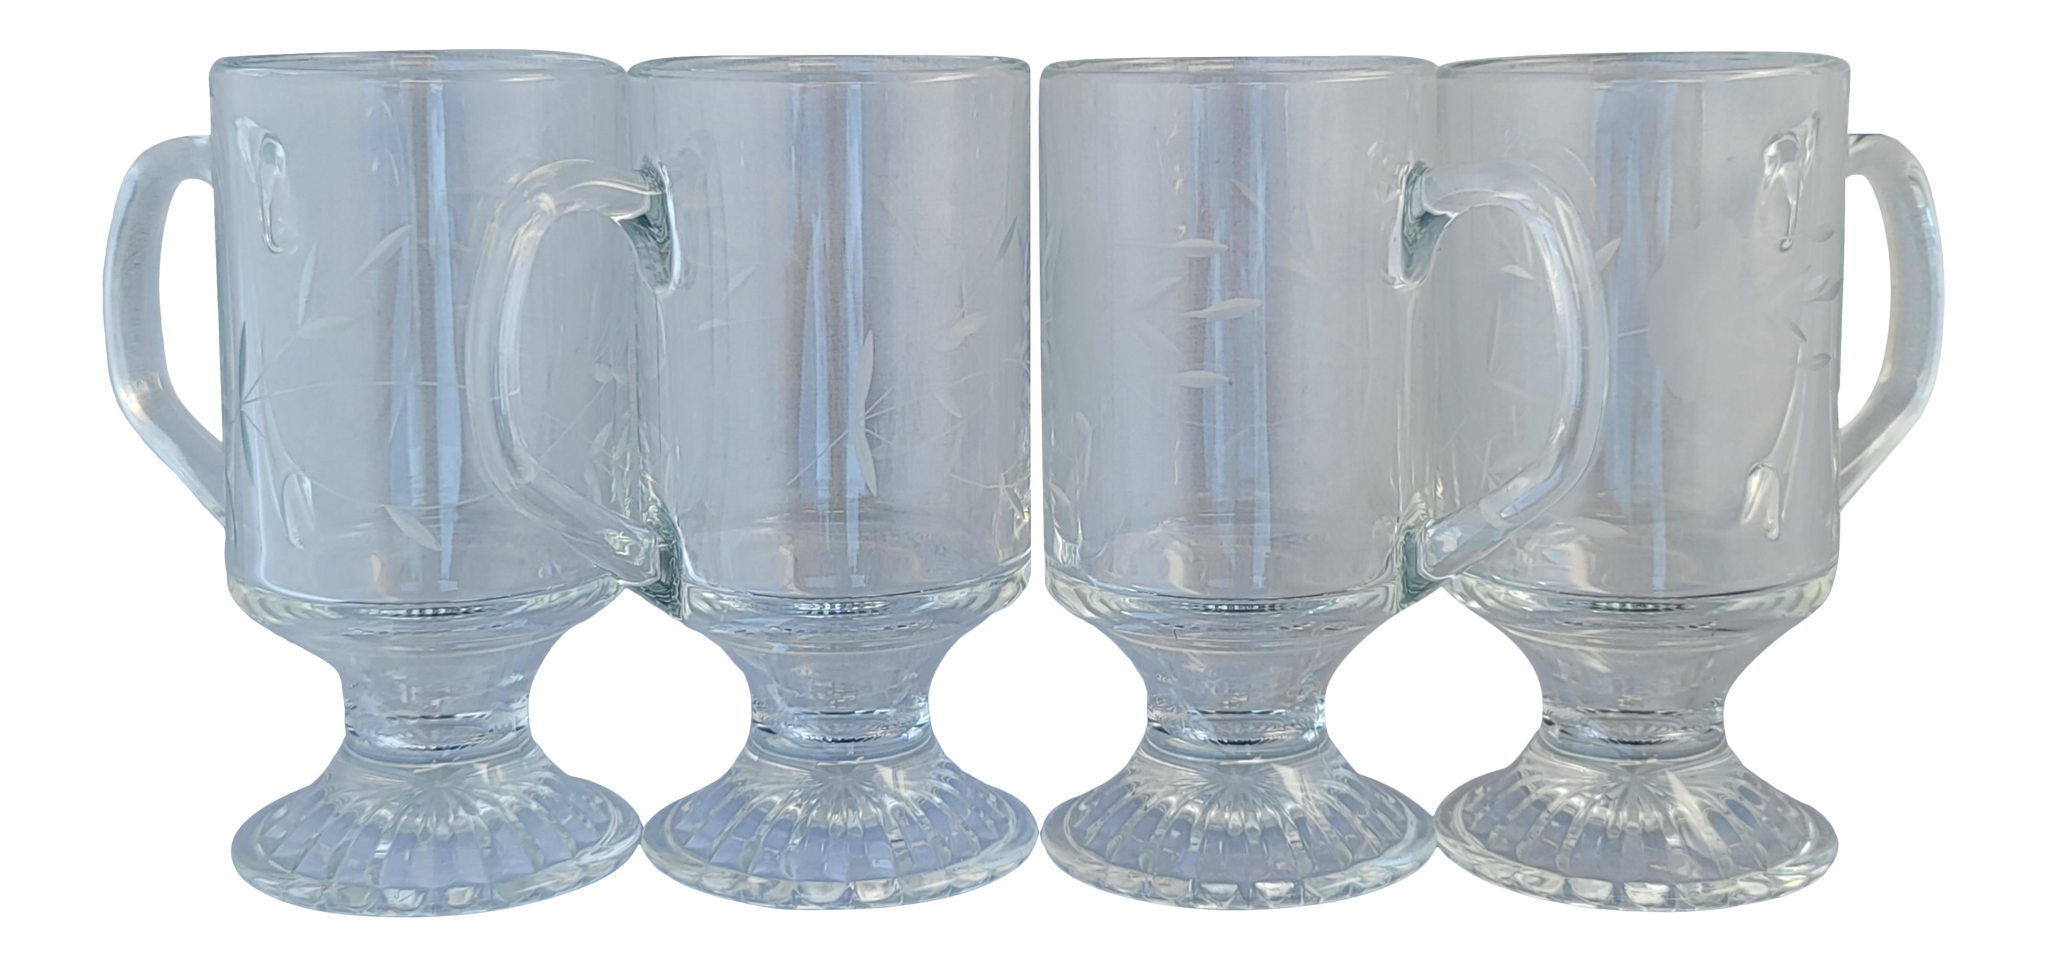 https://eclecticcollective.com/cdn/shop/products/vintage-1960s-princess-house-footed-clear-pressed-cut-glass-mugs-latte-glasses-set-of-4-8484_1024x1024@2x.png?v=1616126260